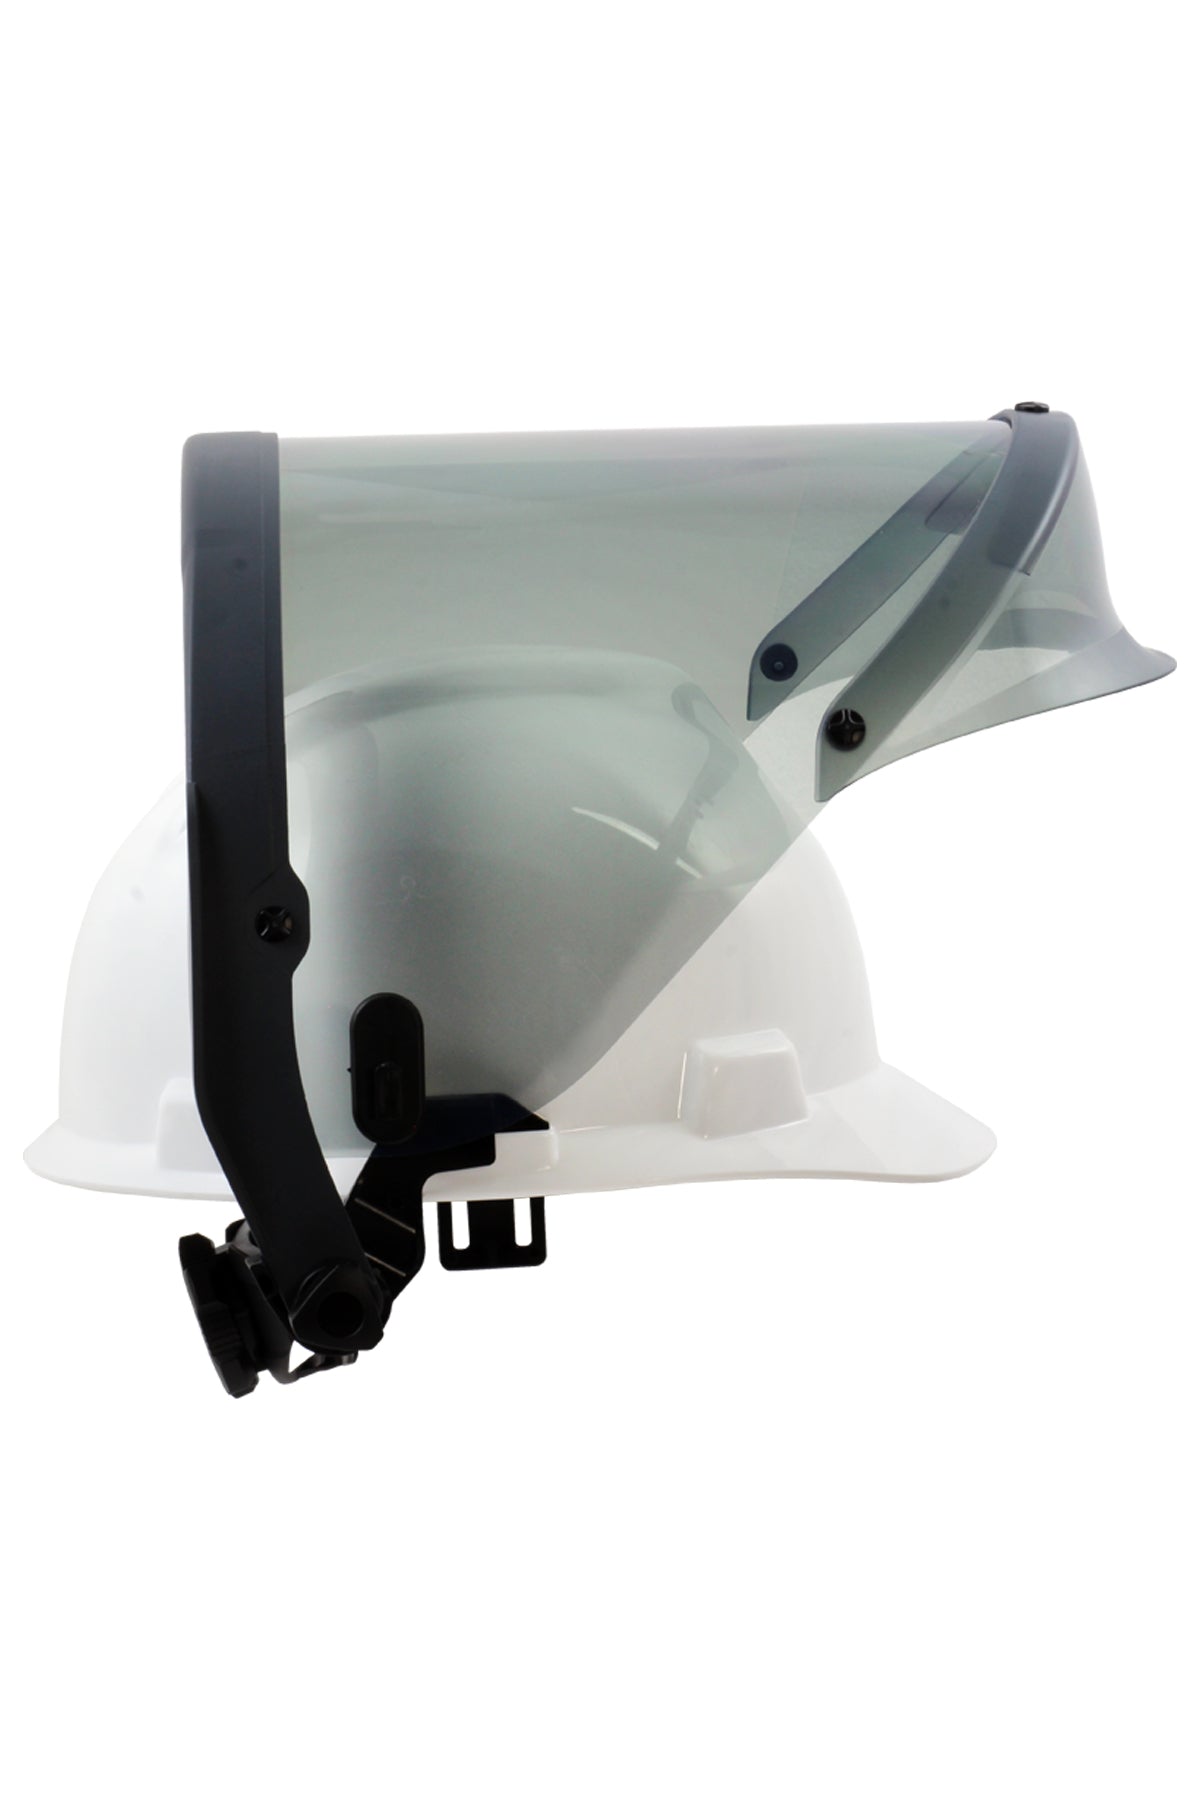 Enespro 20 cal Hover Series Faceshield with Hard Hat - H20HTHAT